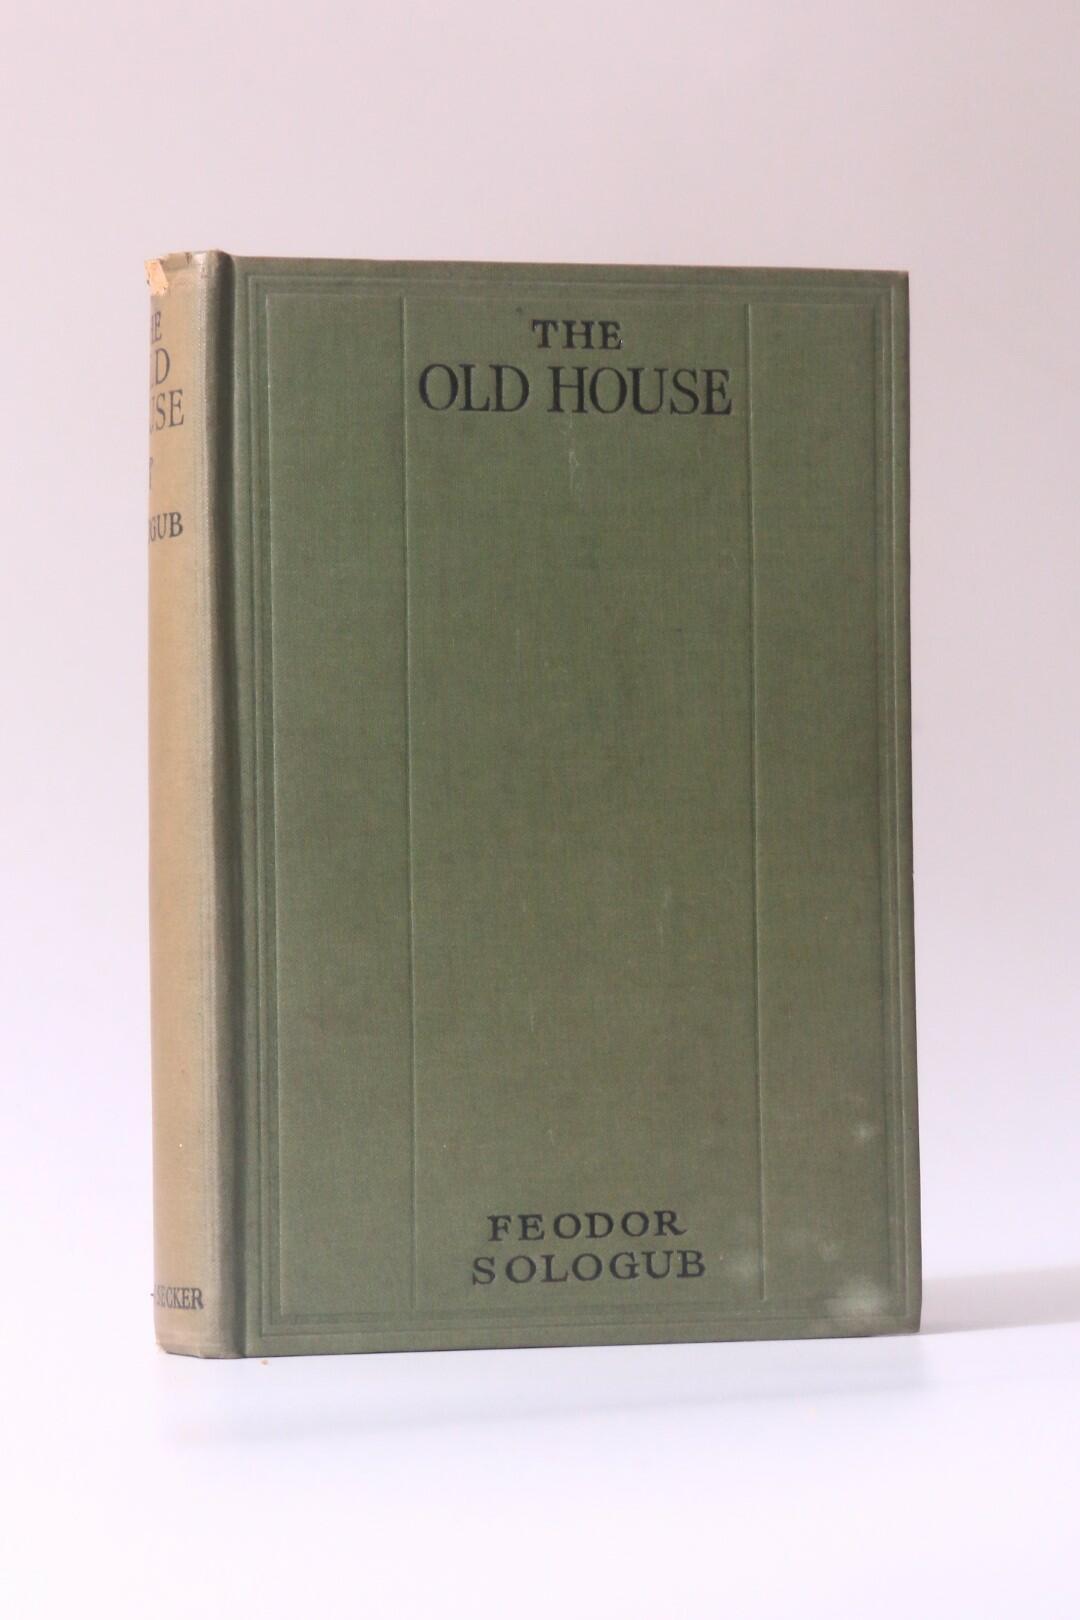 Feodor Sologub - The Old House - Martin Secker, 1915, First Edition.